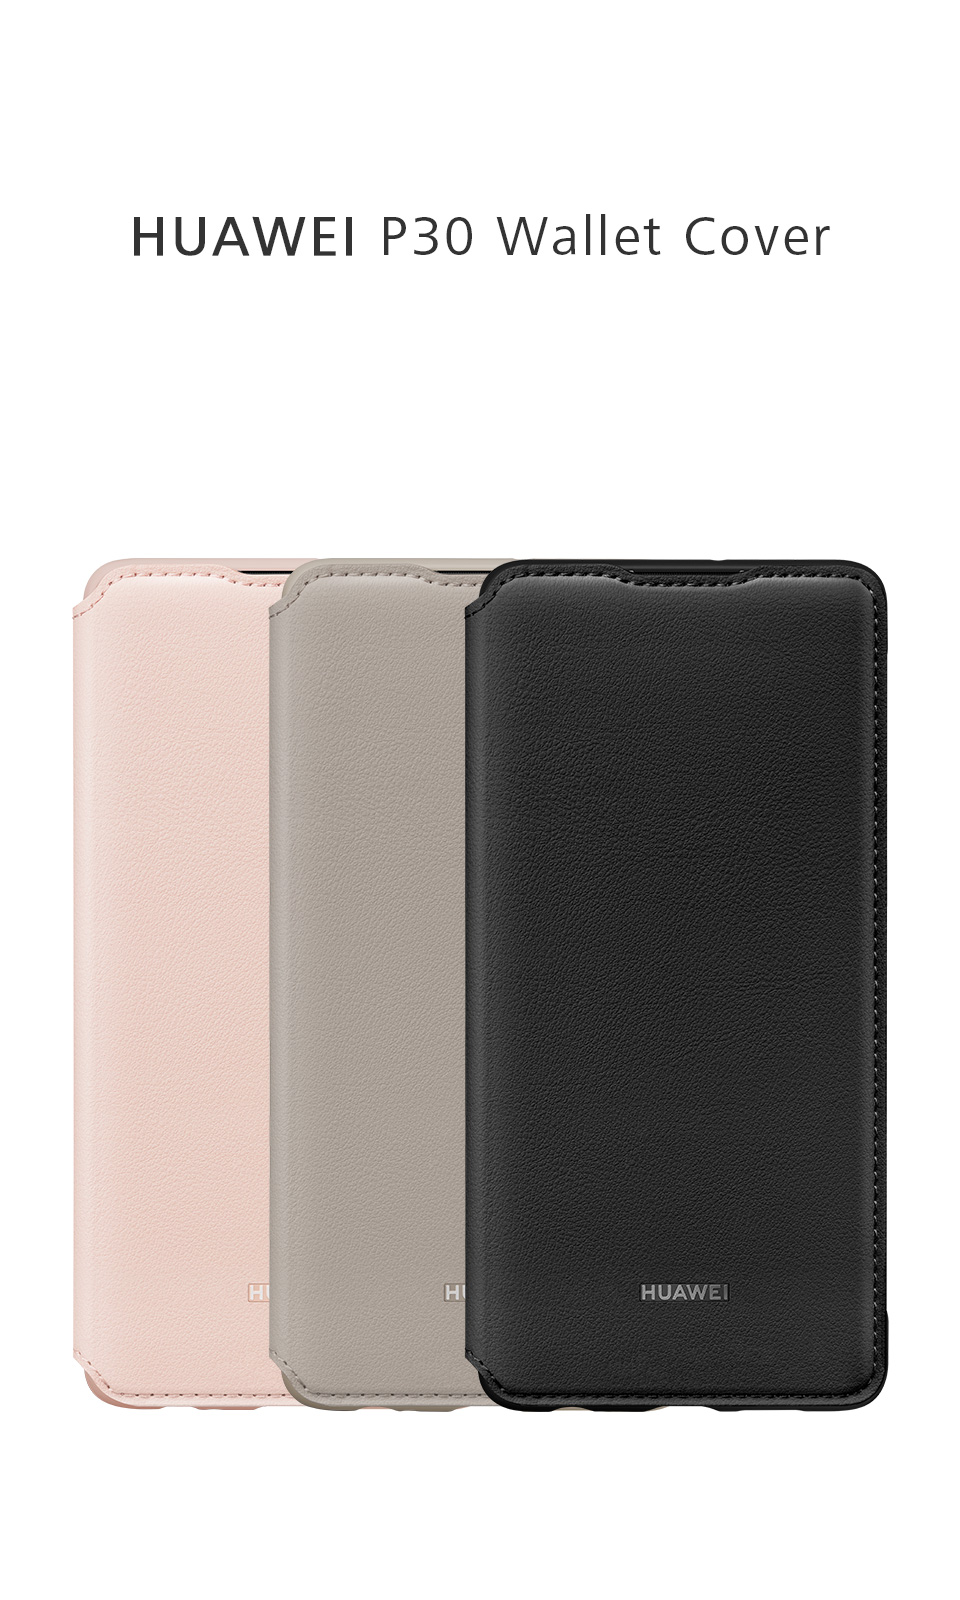 HUAWEI P30 Wallet Cover